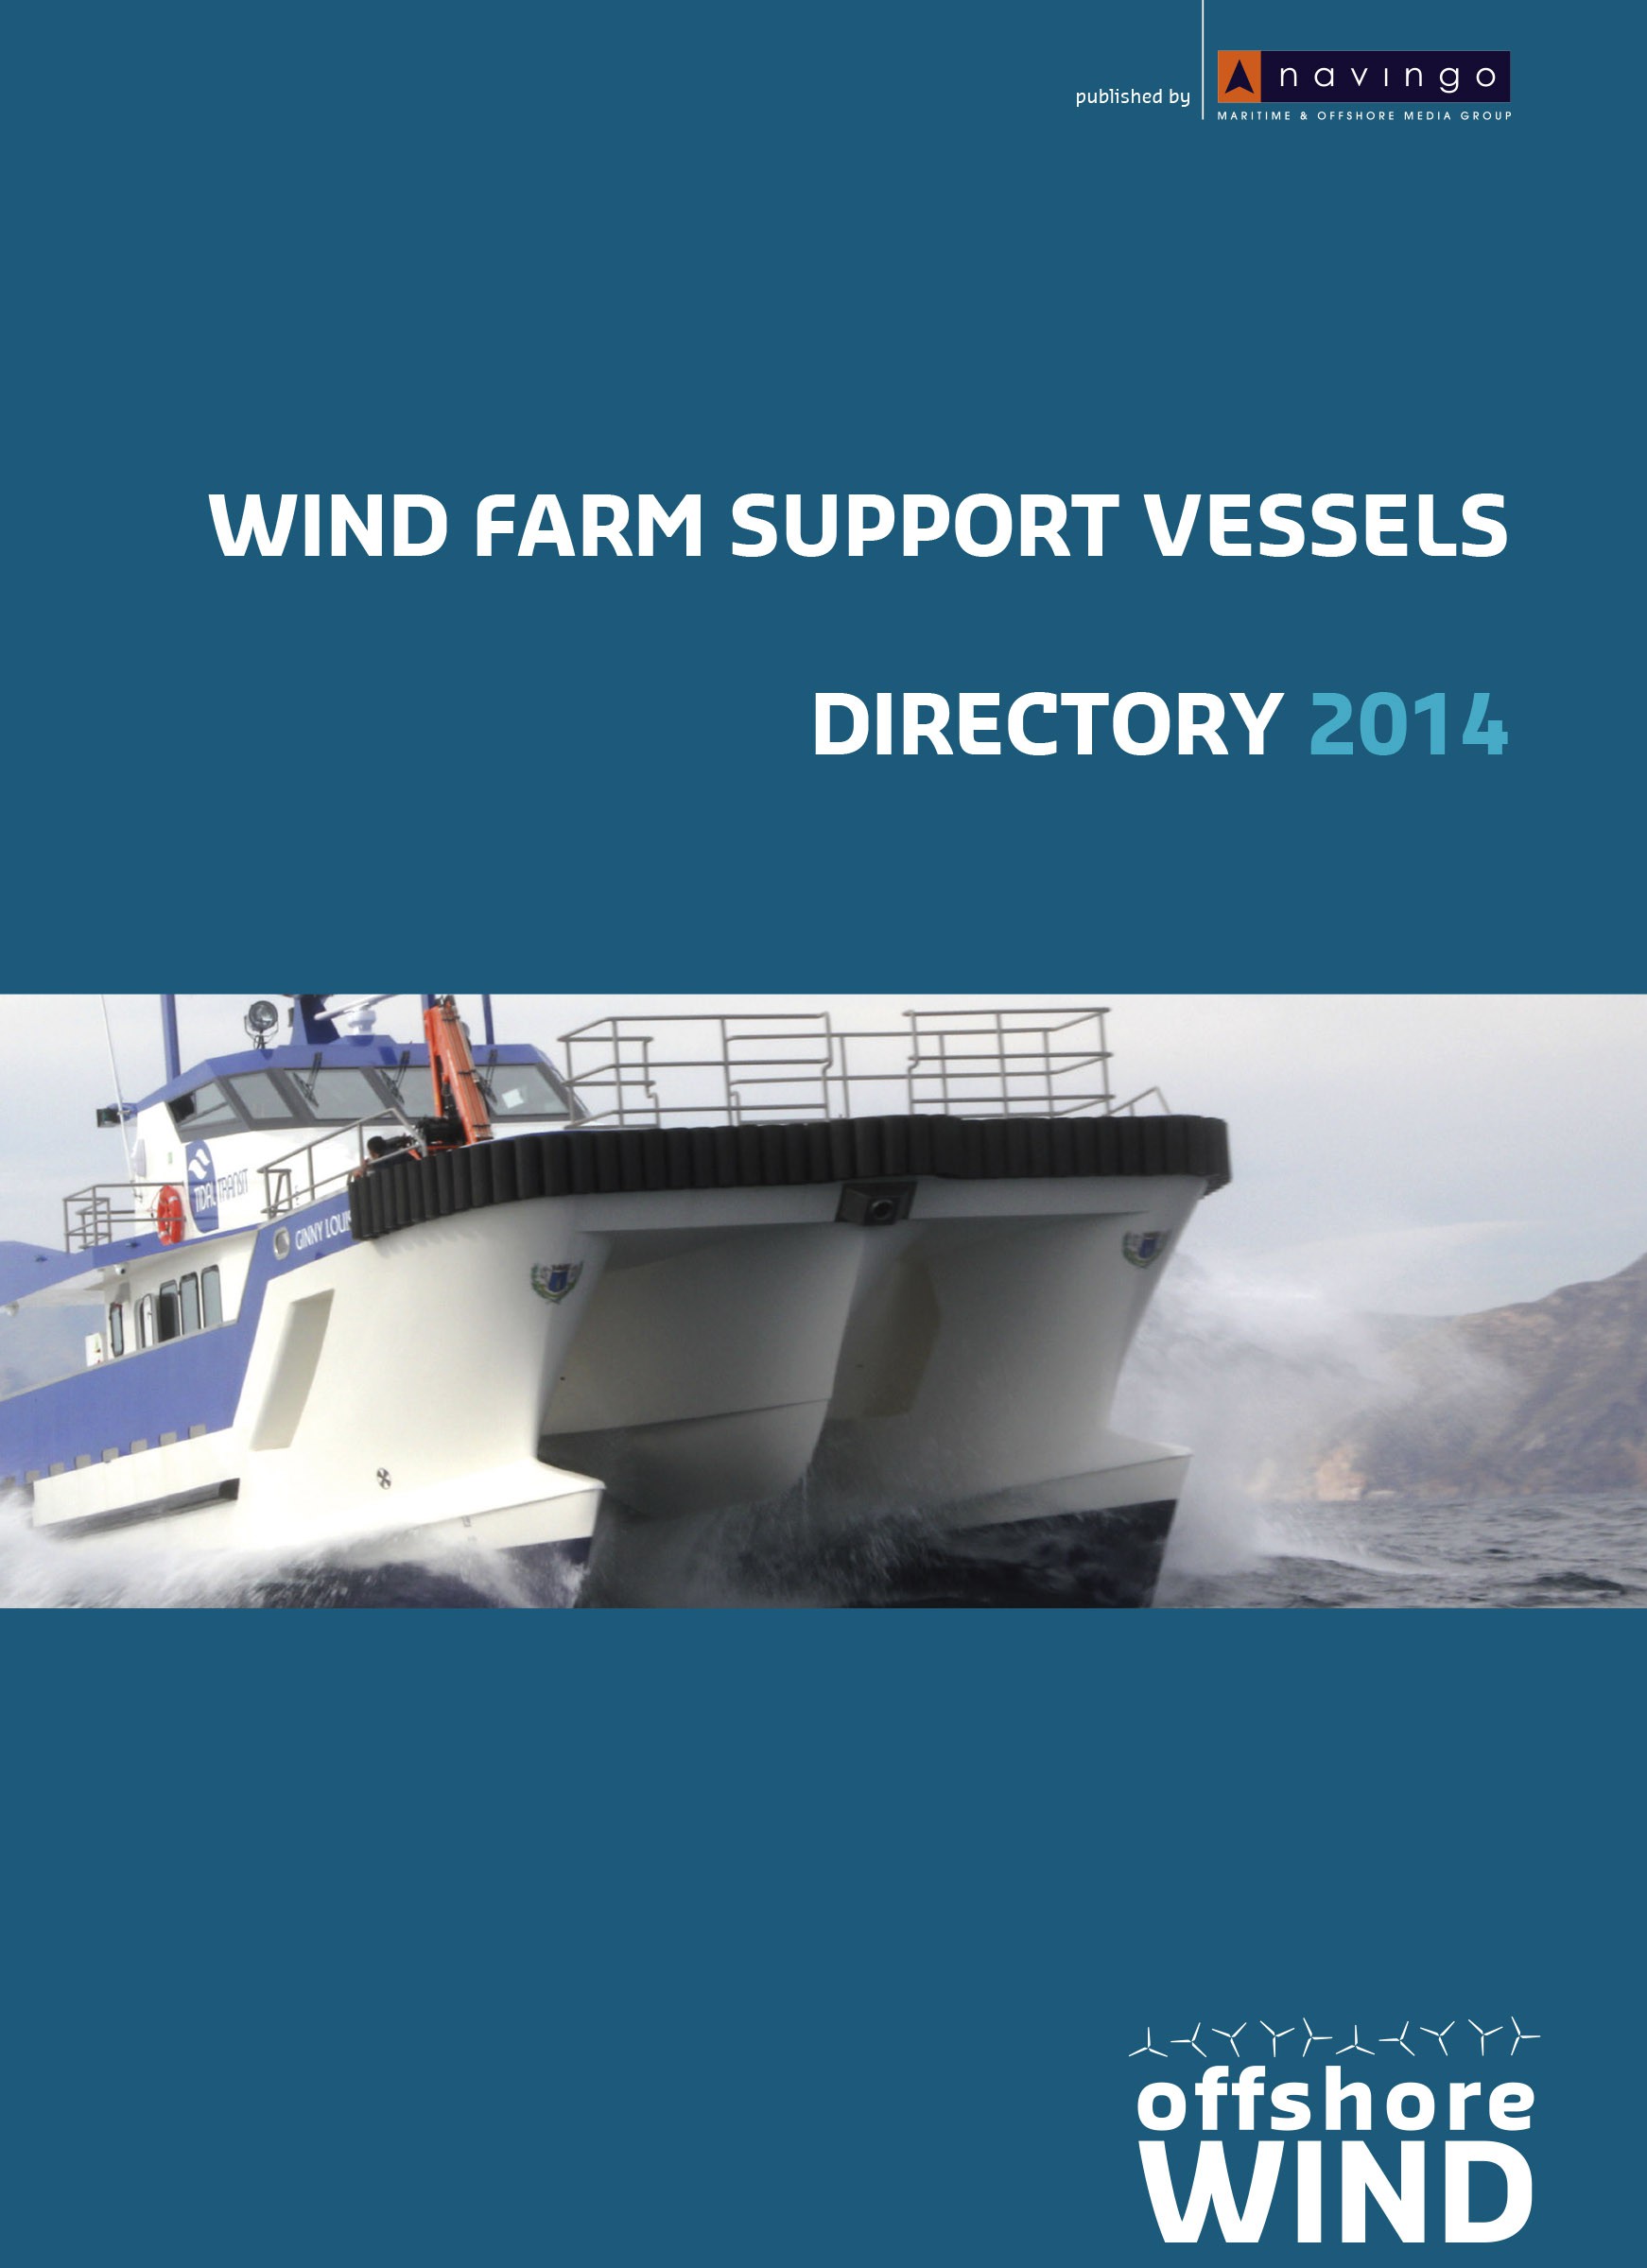 Offshore WIND's Wind Farm Support Vessel Directory Out Now